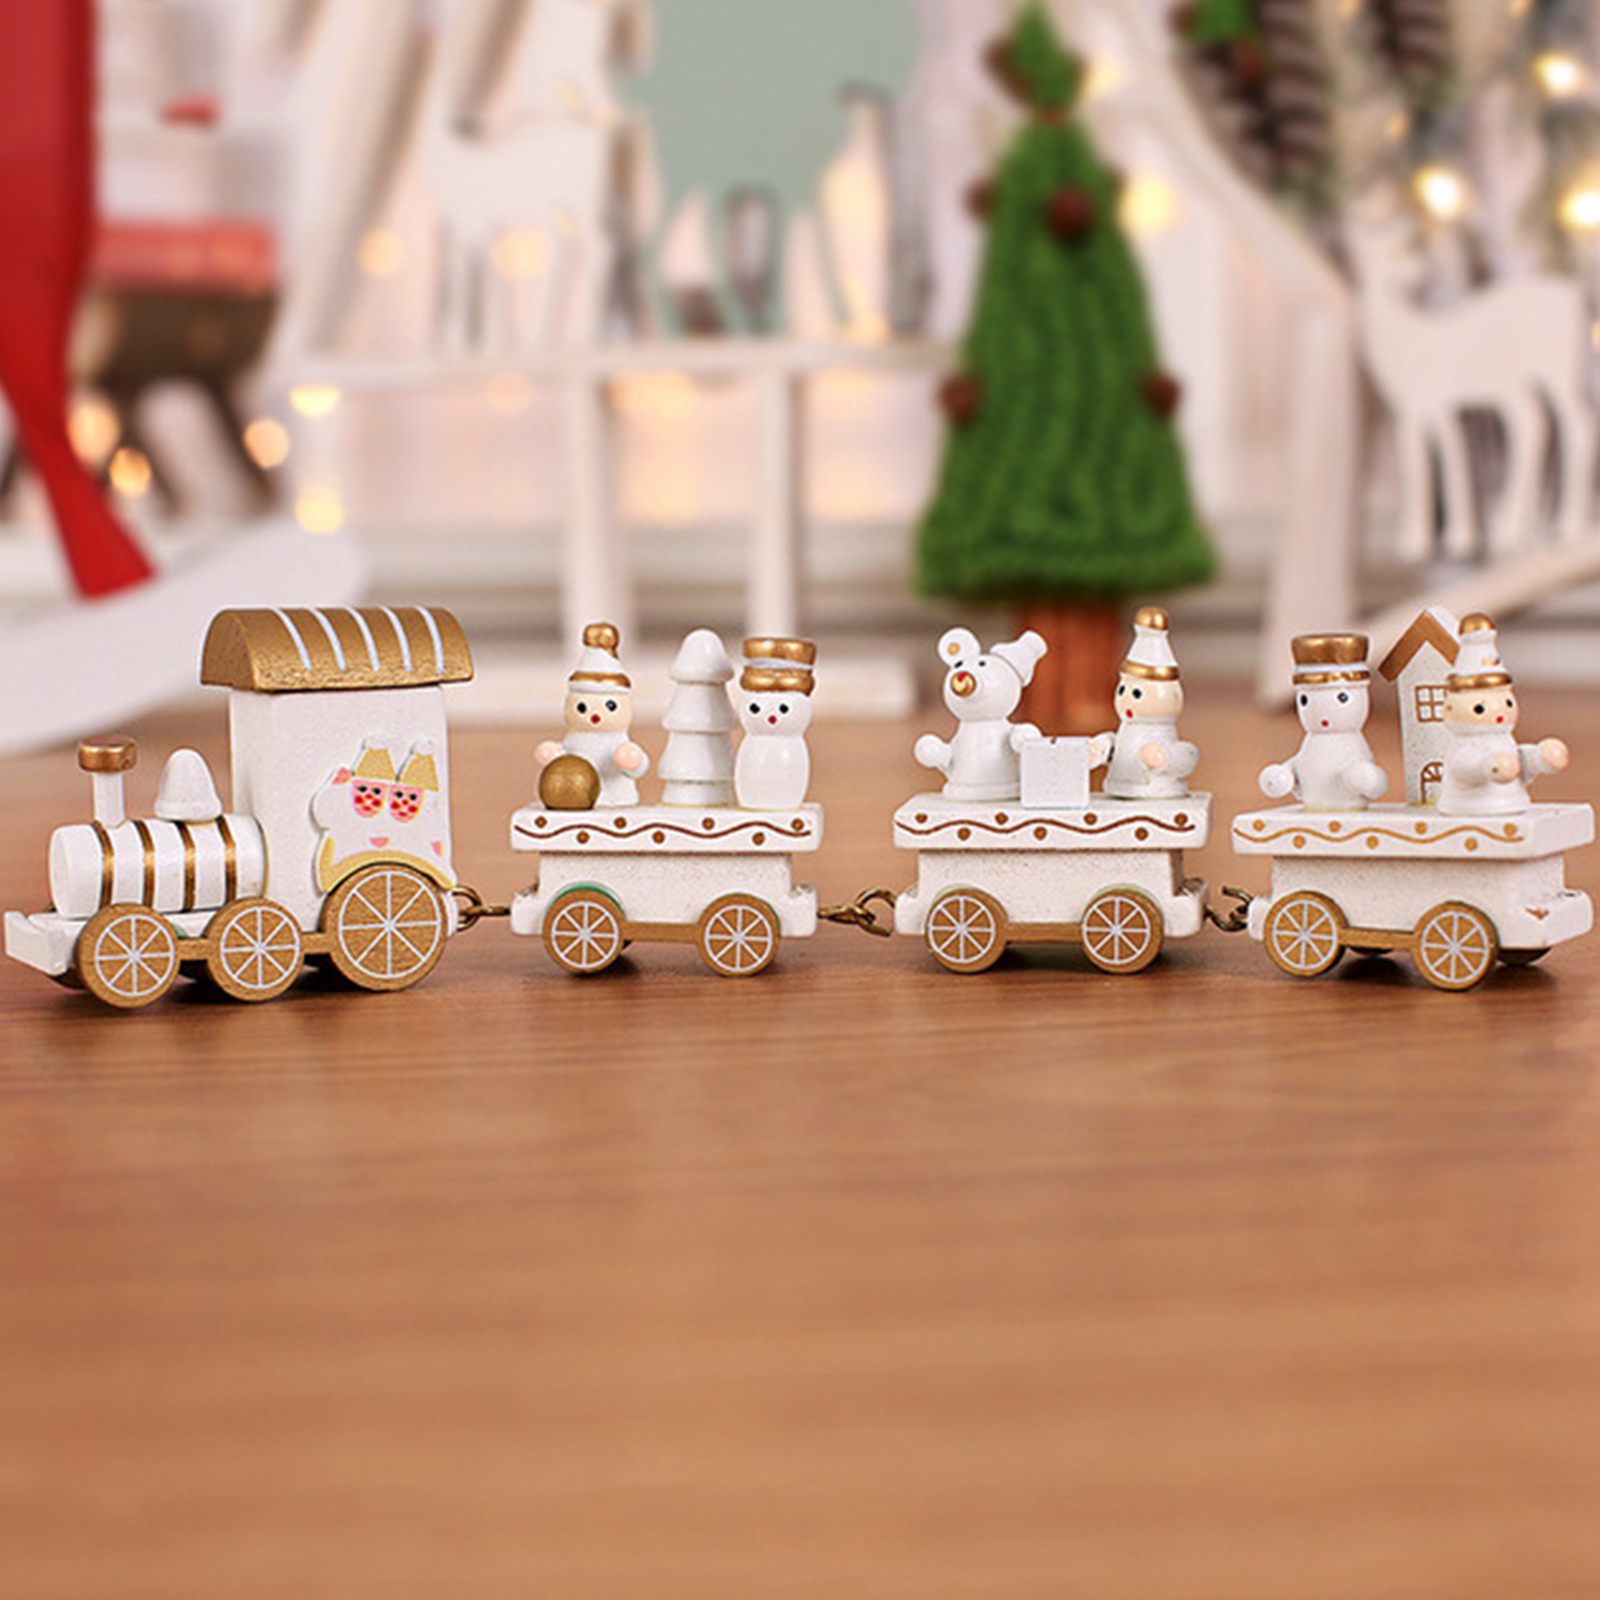 Christmas Wooden Train Table Ornament Holiday Festive Party Home Decor ...